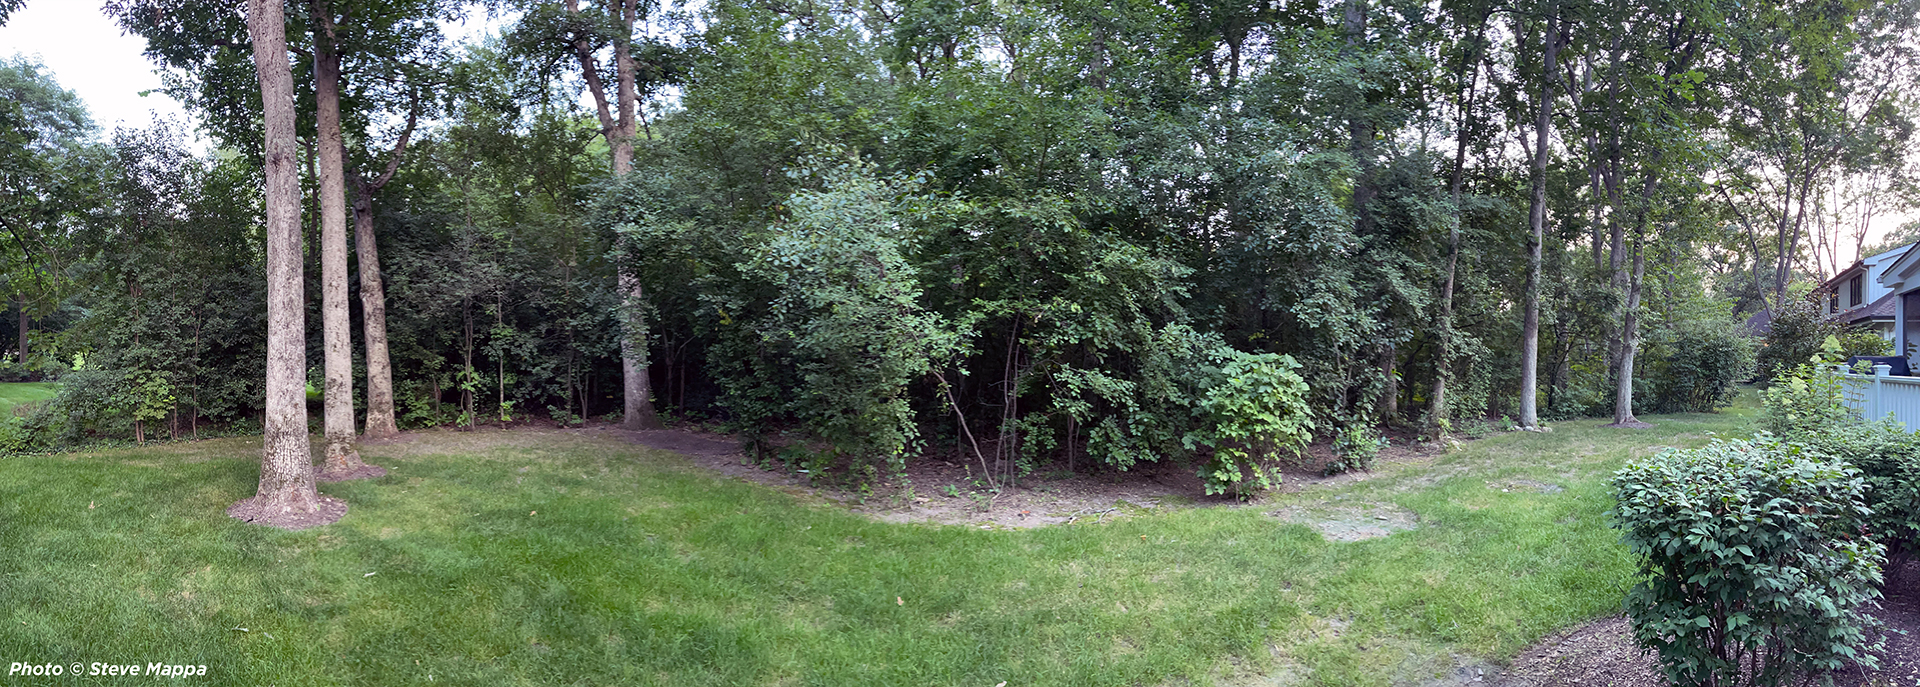 View of a backyard invaded by buckthorn.